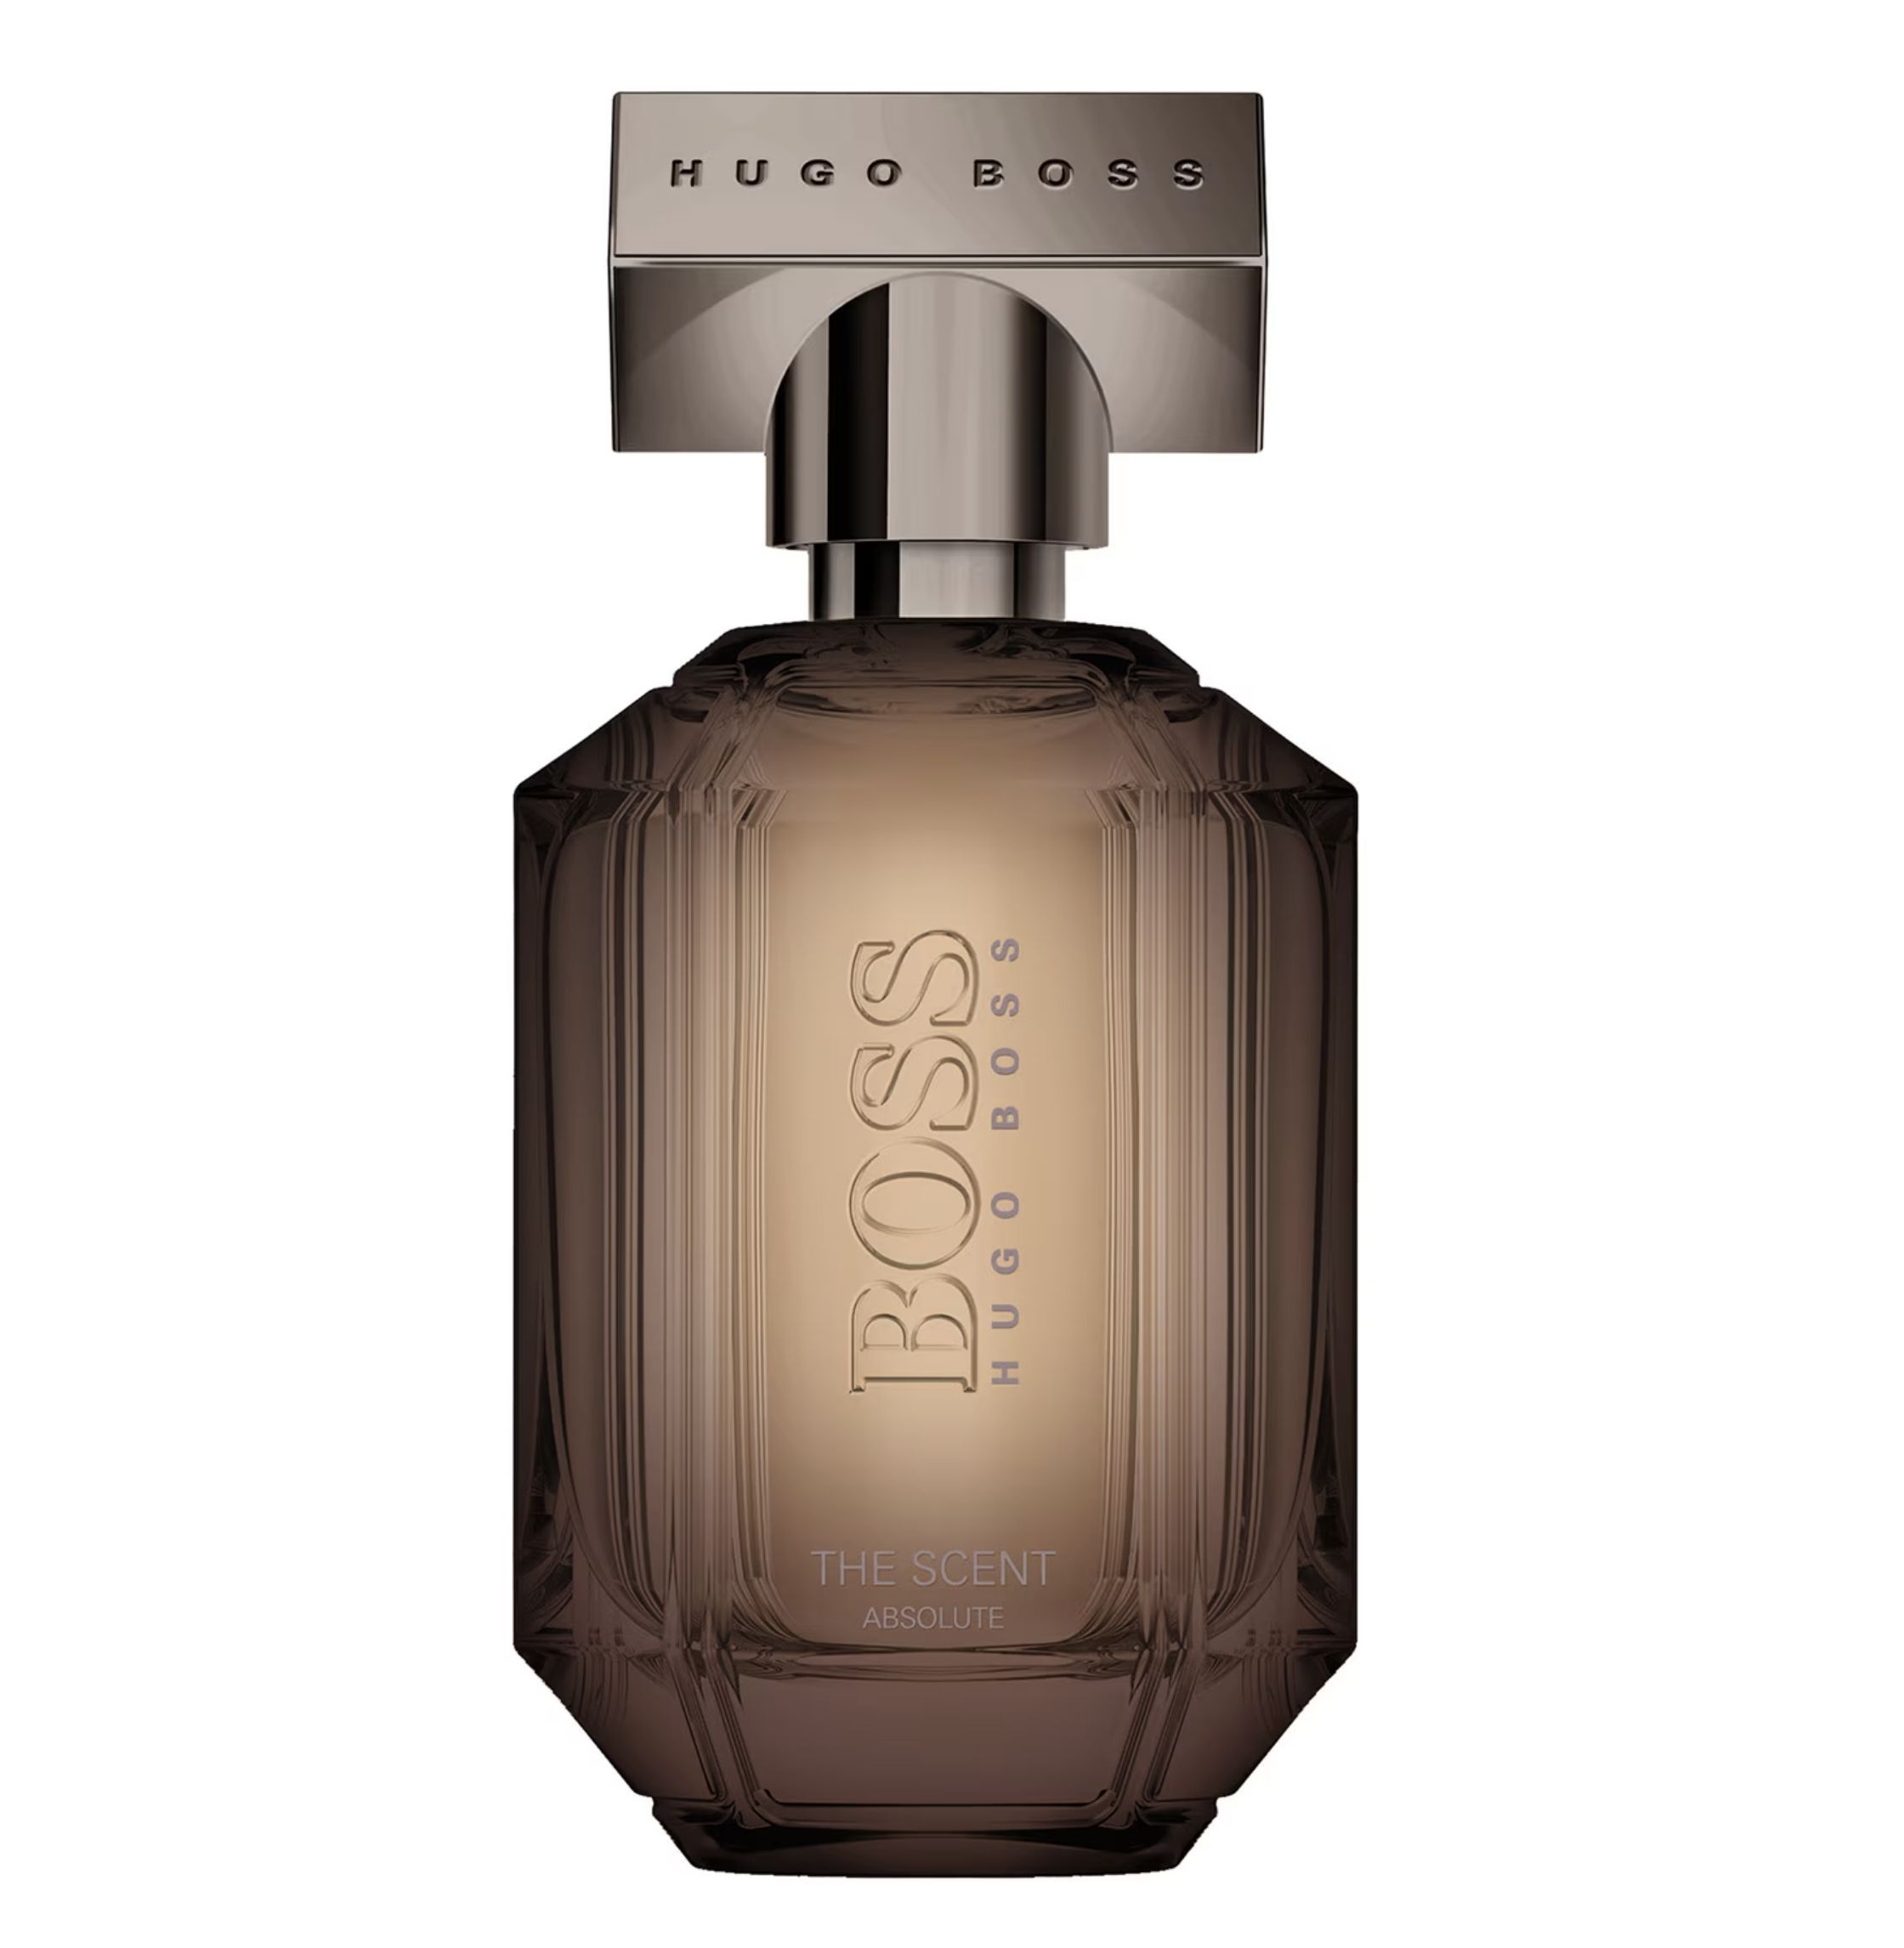 Absolute she. Boss the Scent for her Hugo Boss. The Scent Hugo Boss женские. Hugo Boss the Scent for her Eau de Parfum. Boss Hugo Boss the Scent духи женские.